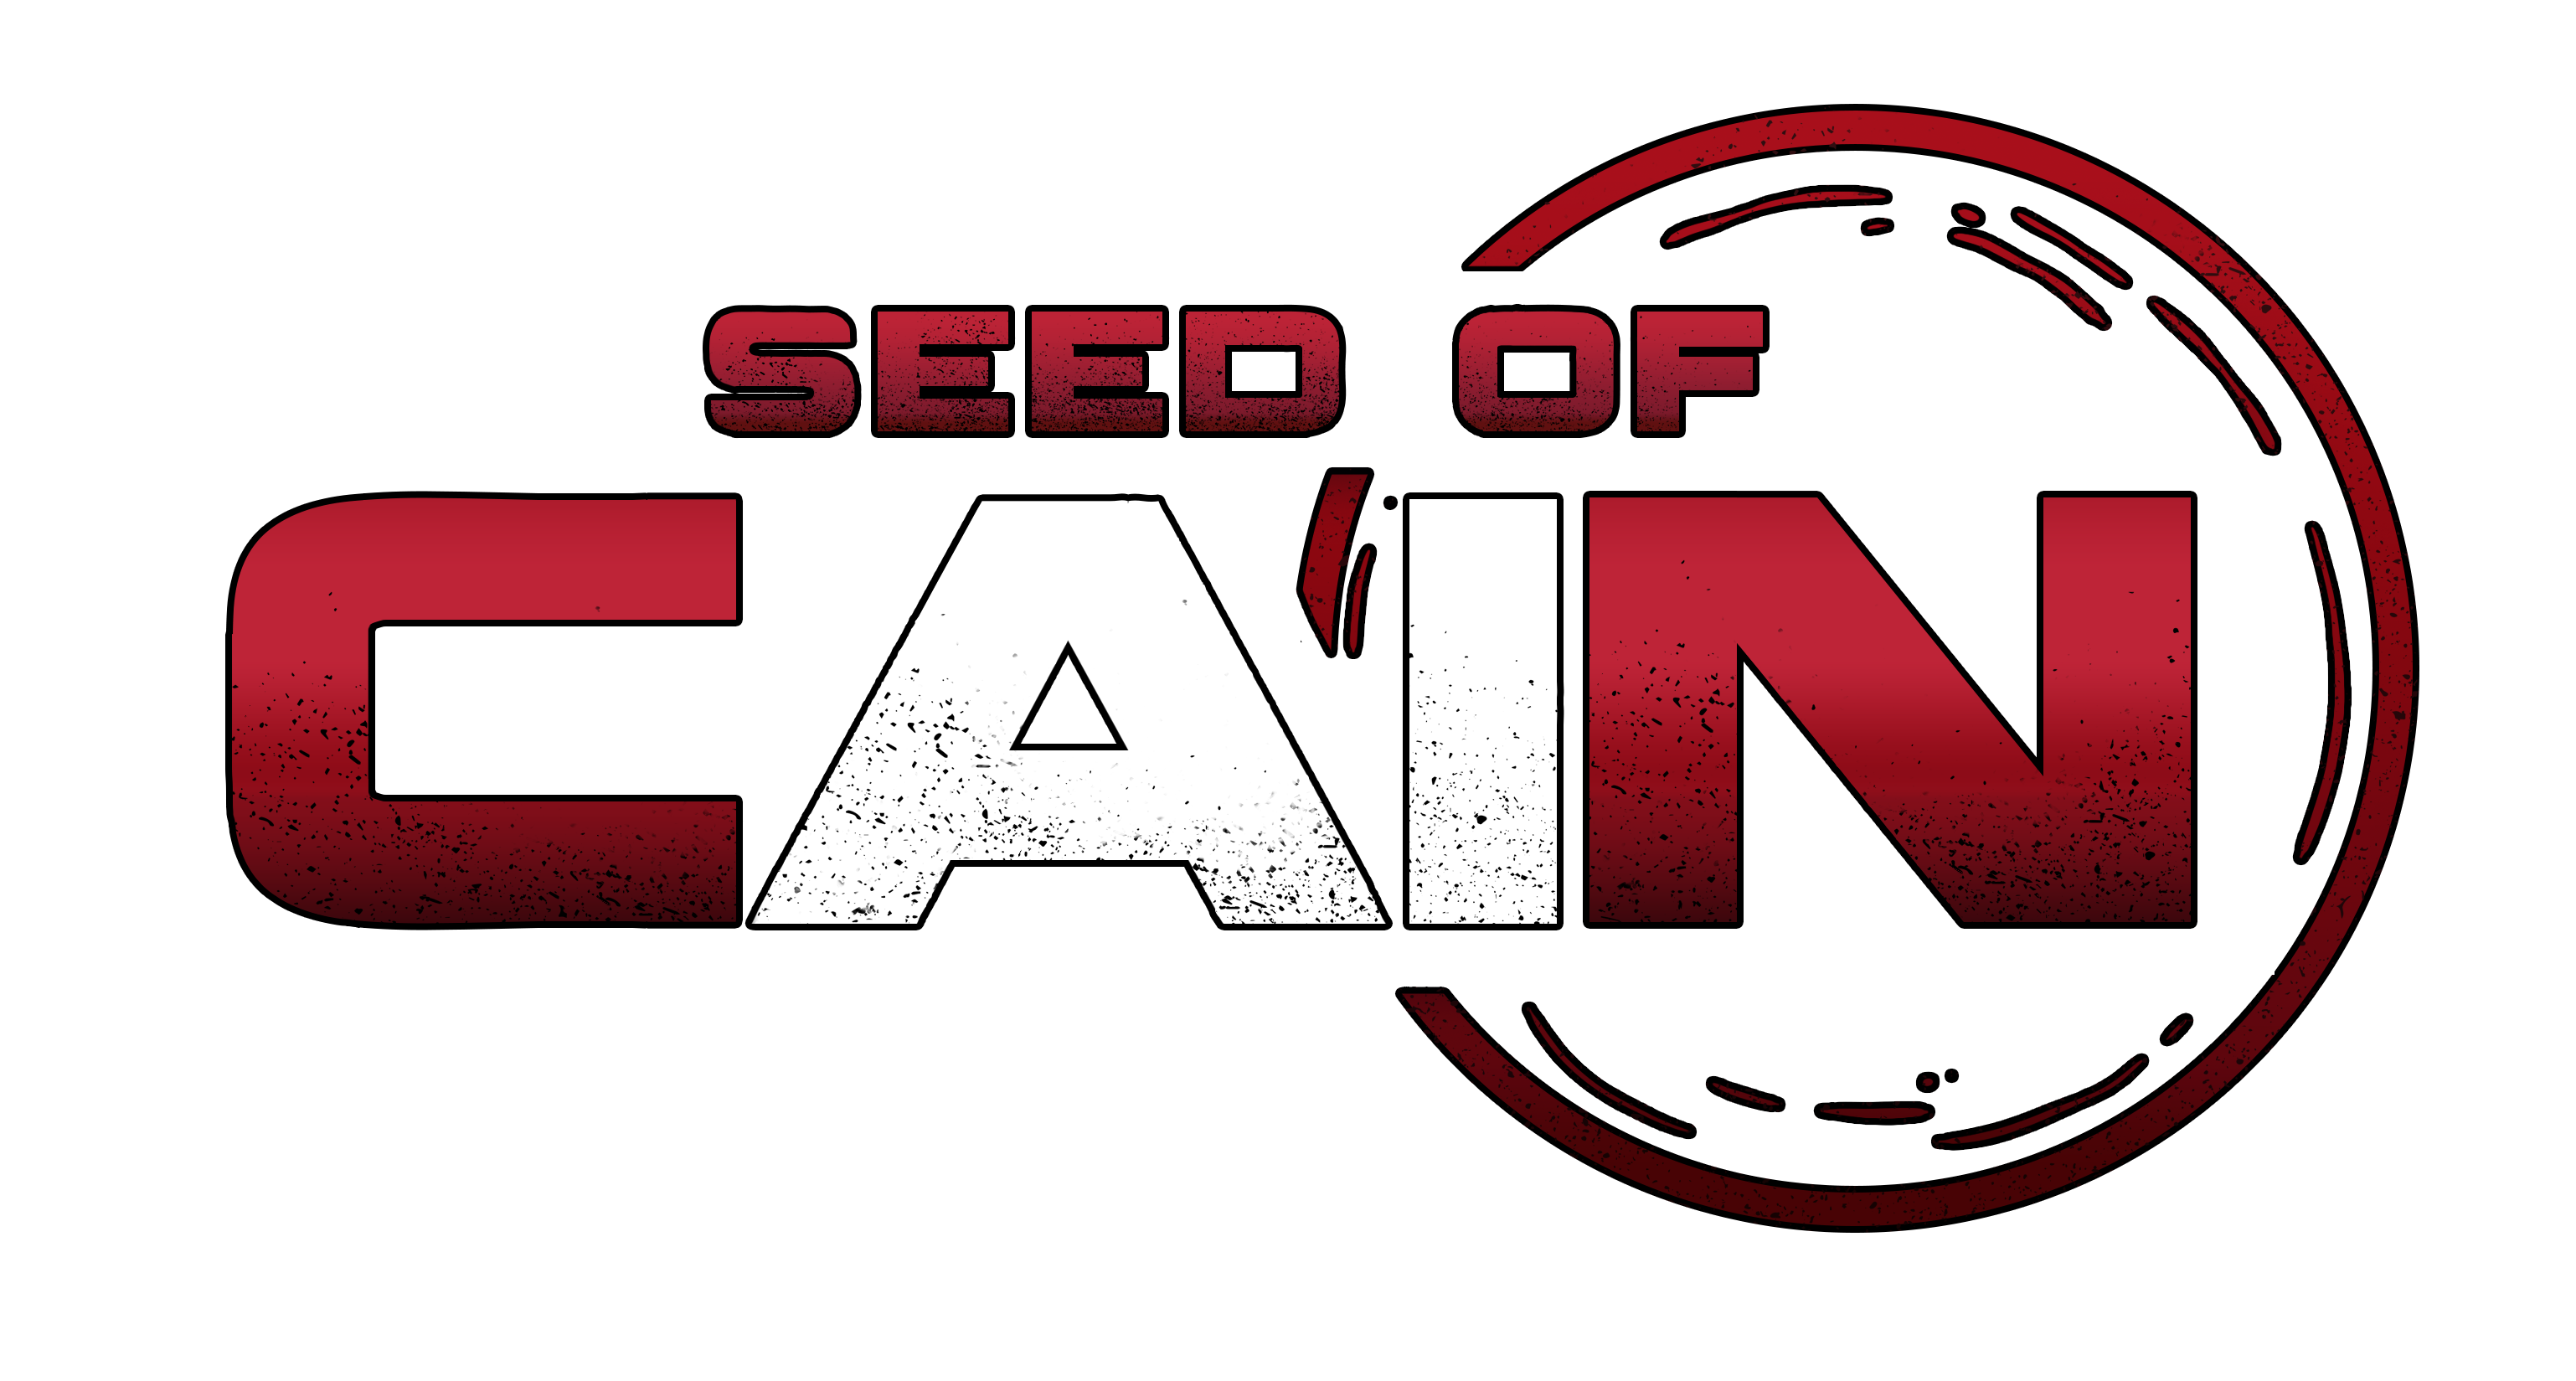 Seed of Cain Logo